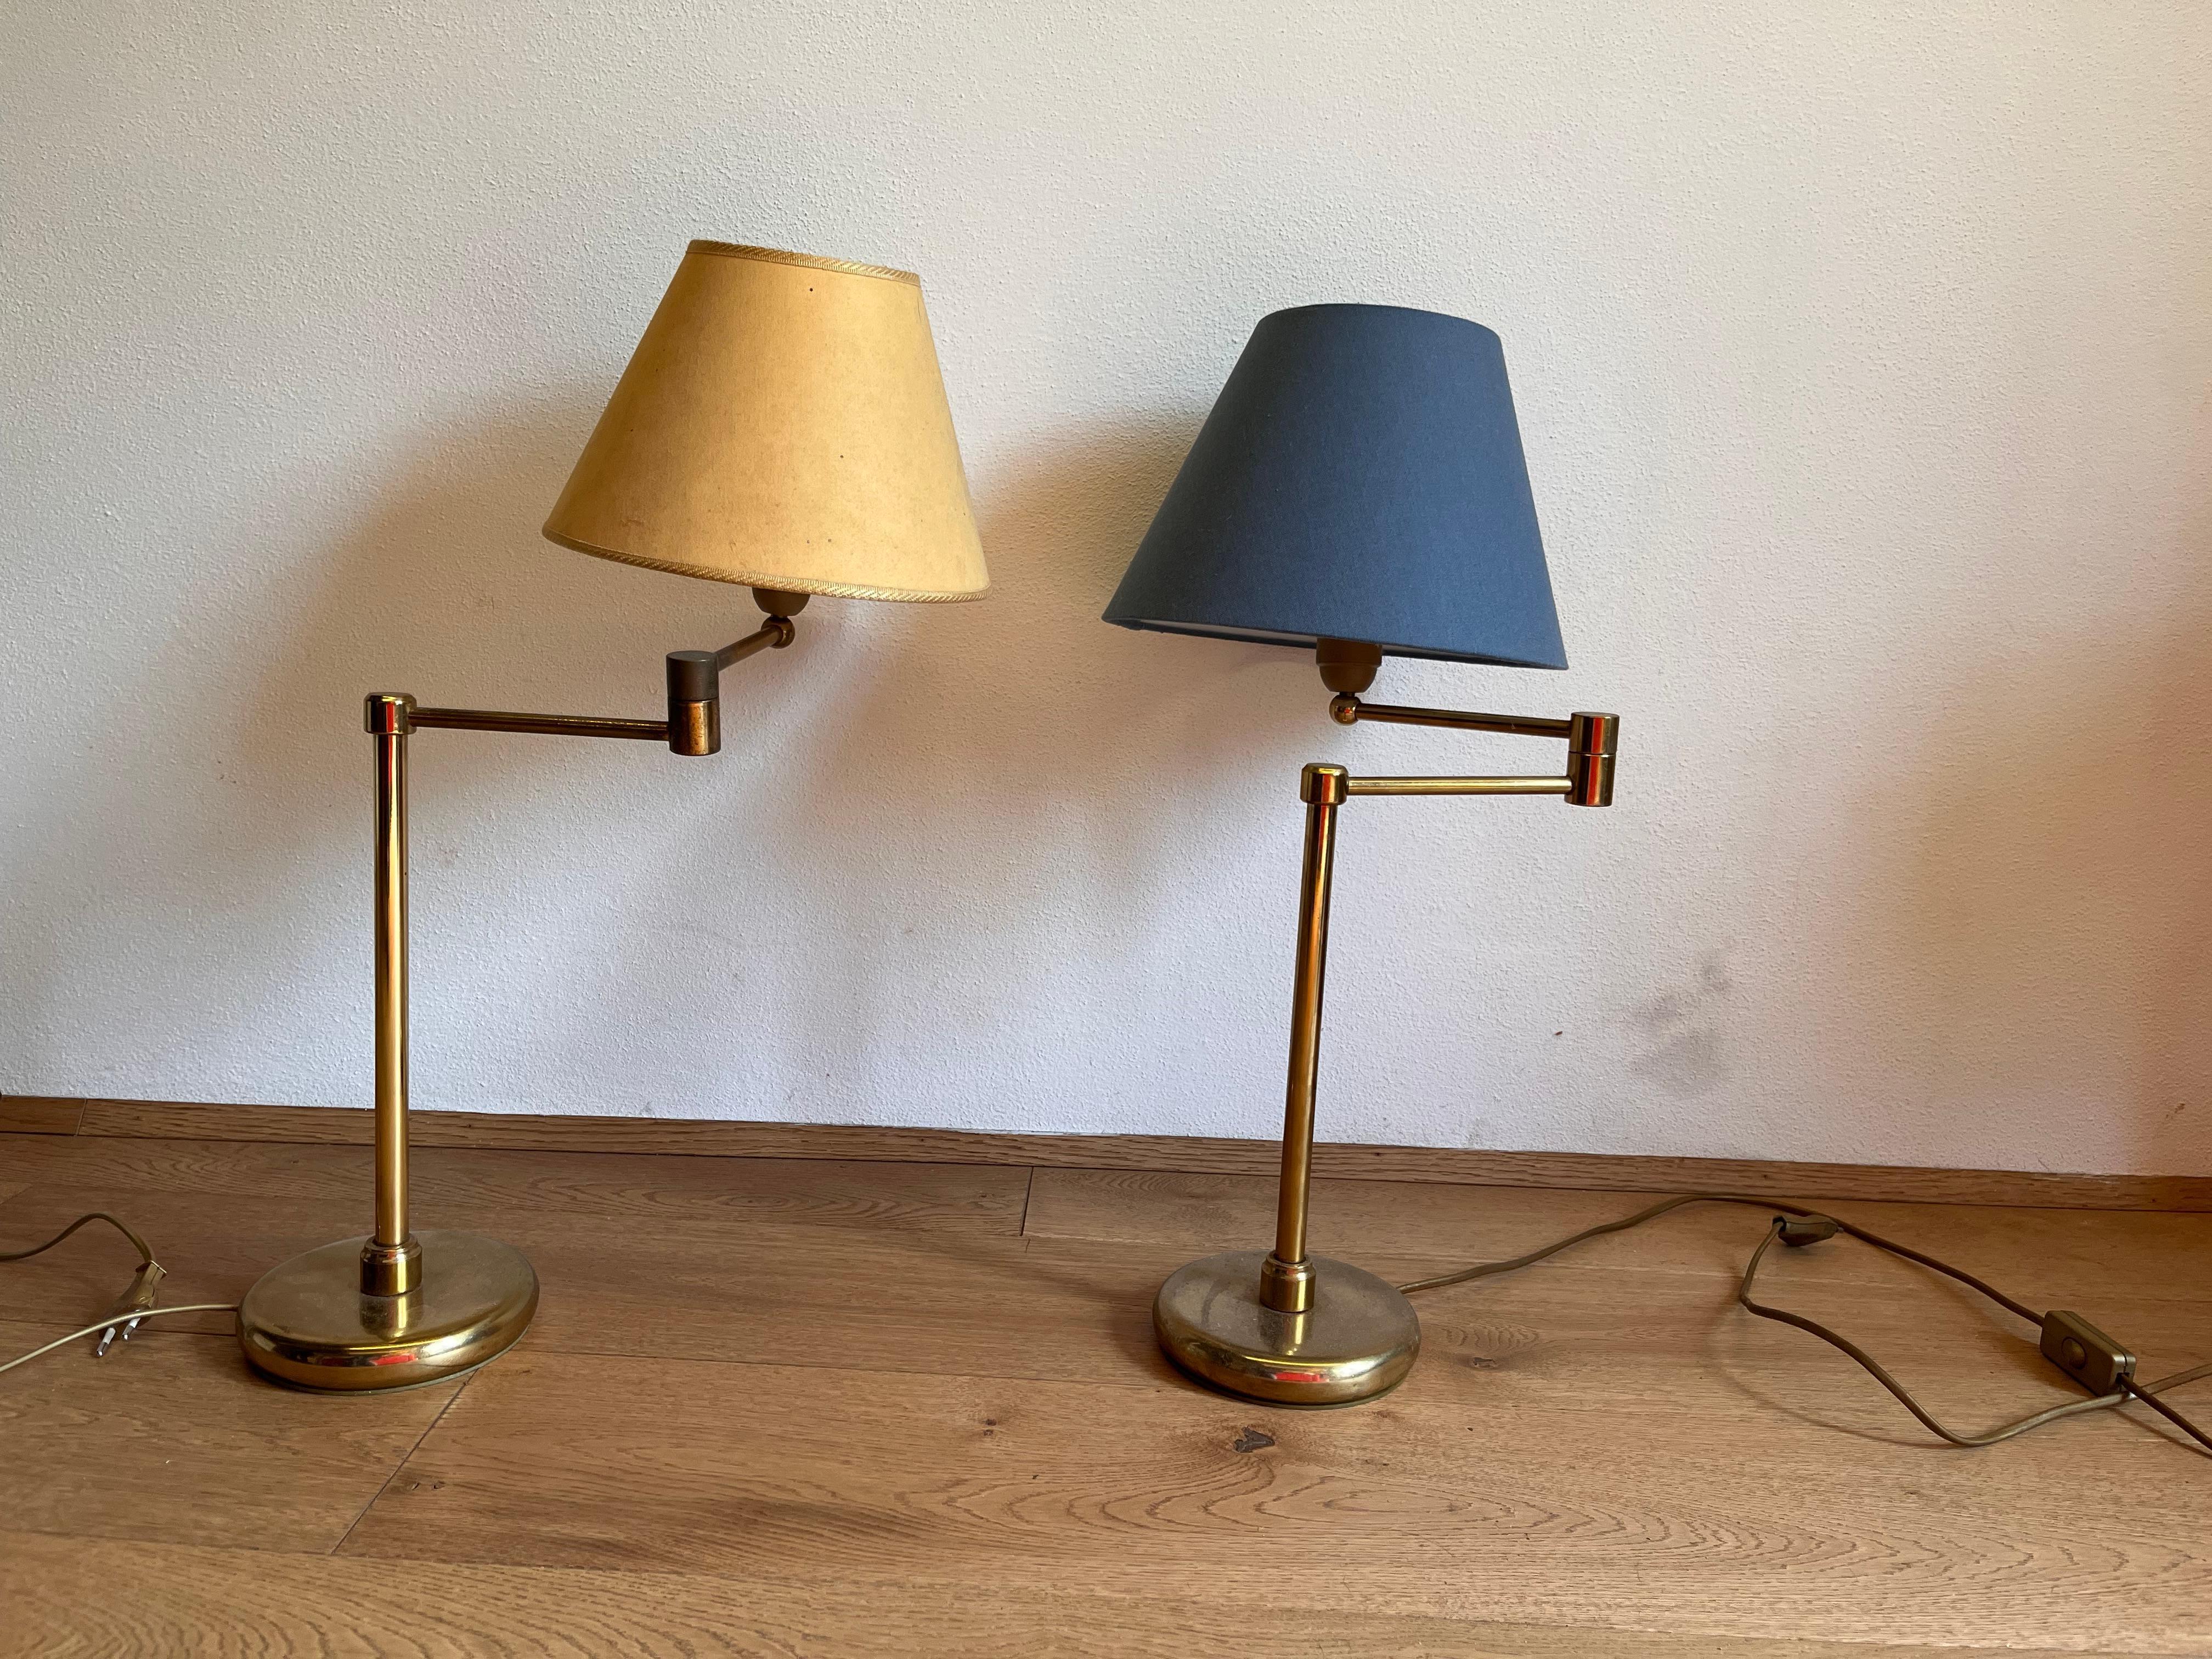 Two table lamp in good condition made of brass with blue and ochre fabric shade
Dimensions height 56 cm diameter 27 cm base diameter 13 cm
the lampshade can be oriented in many directions
Bulb socket E14